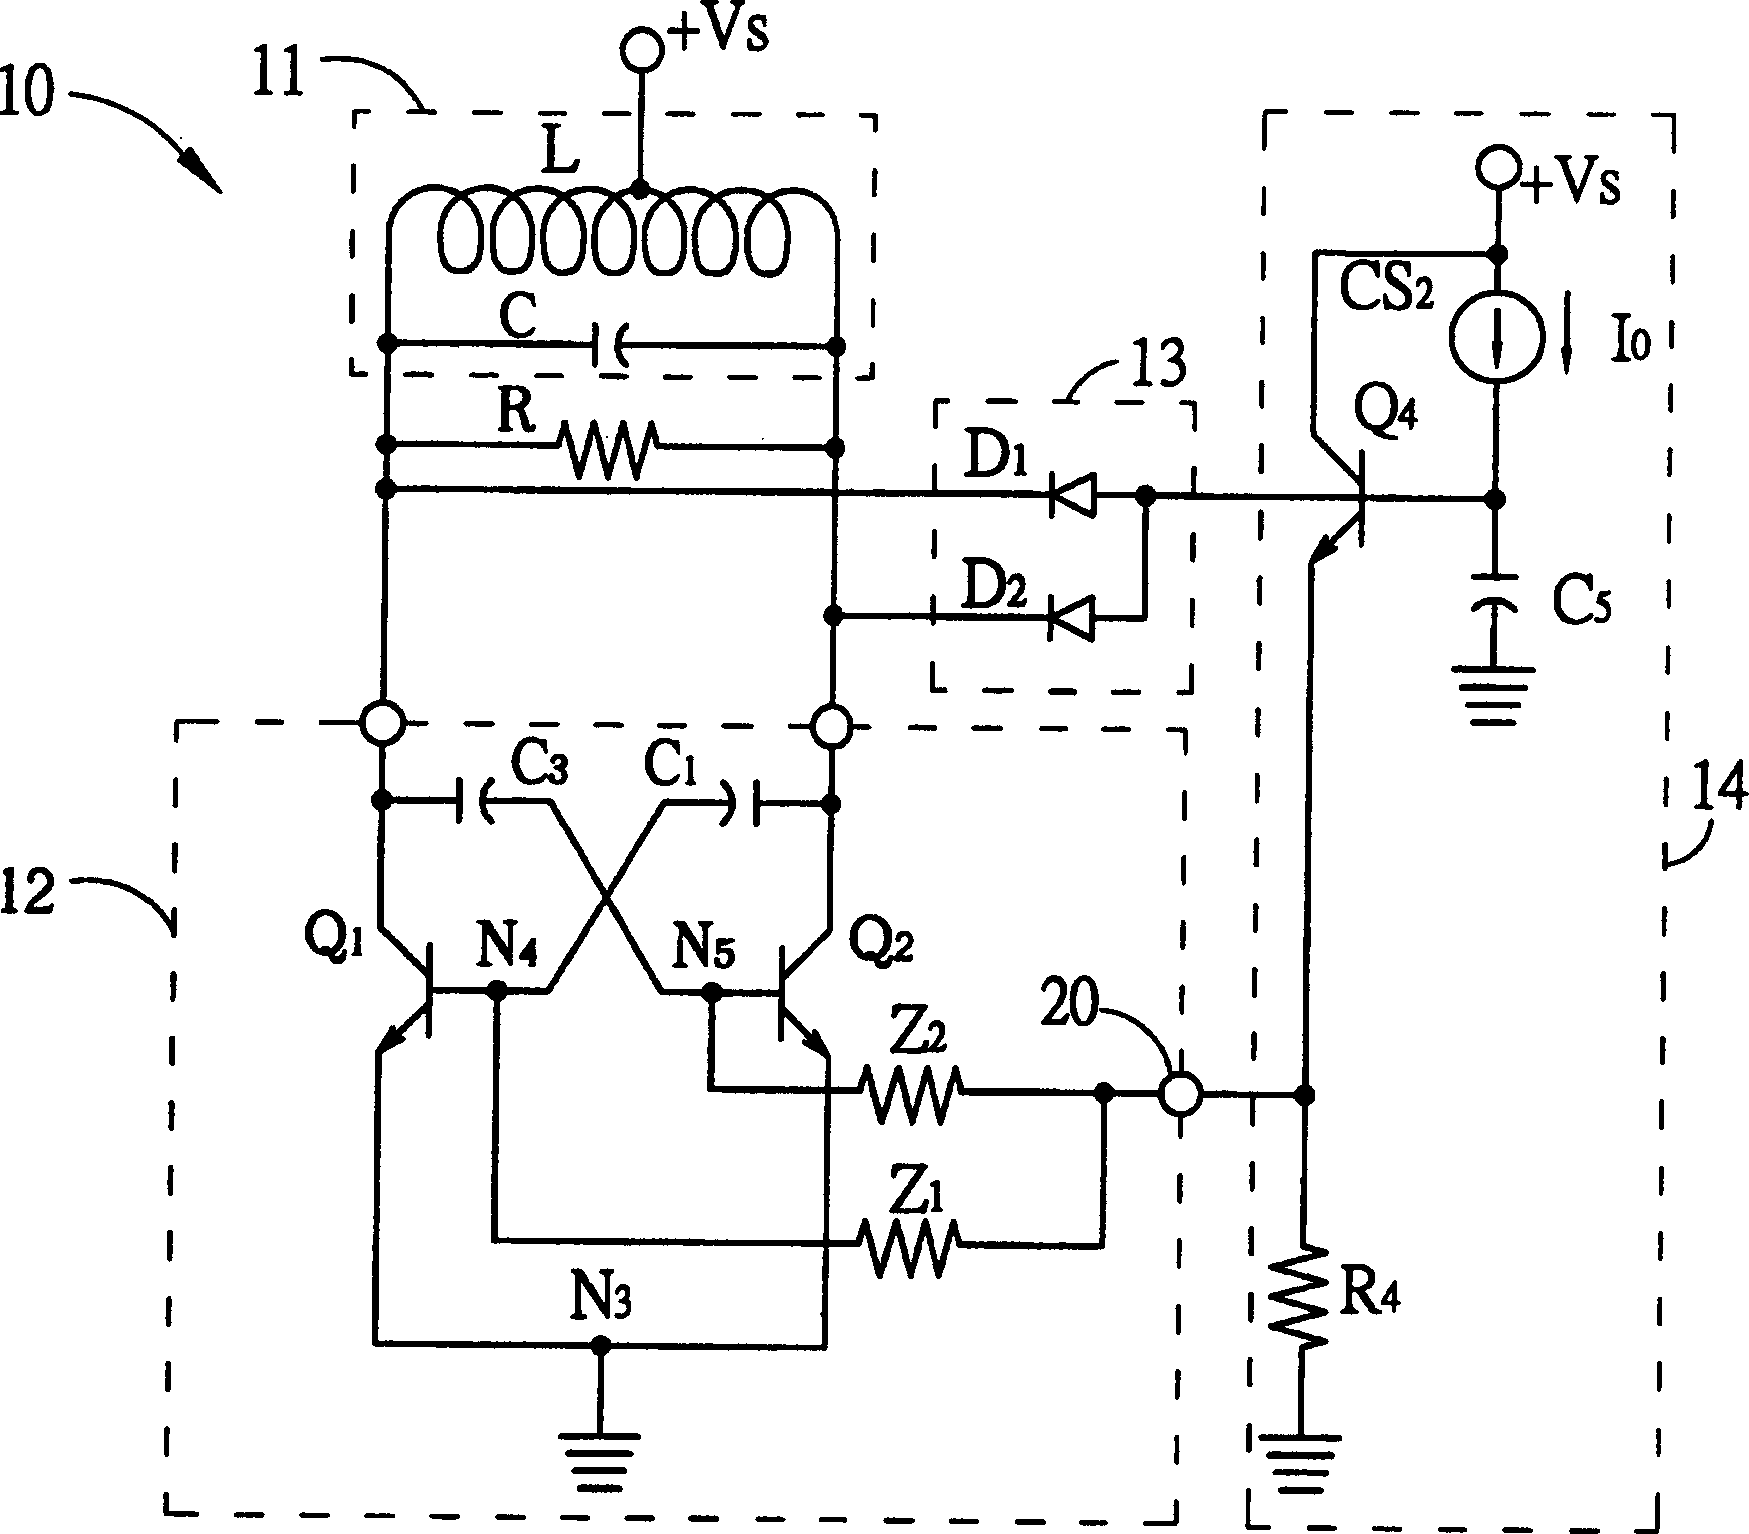 Voltage control oscillator with low phase noise